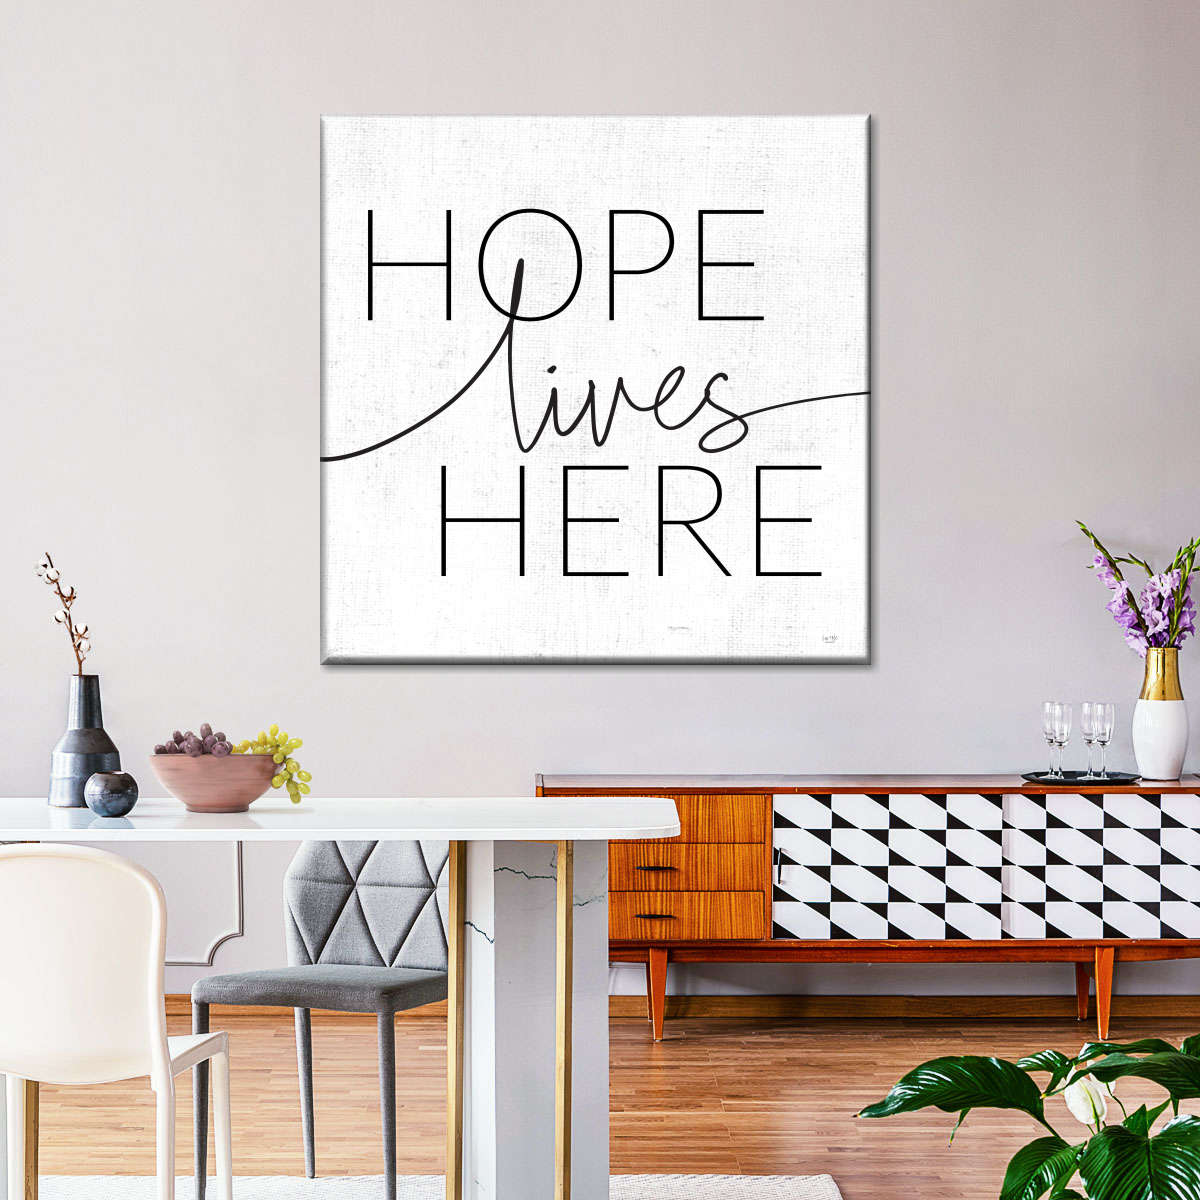 Hope Lives Here Square Canvas Wall Art - Christian Wall Decor - Christian Wall Hanging